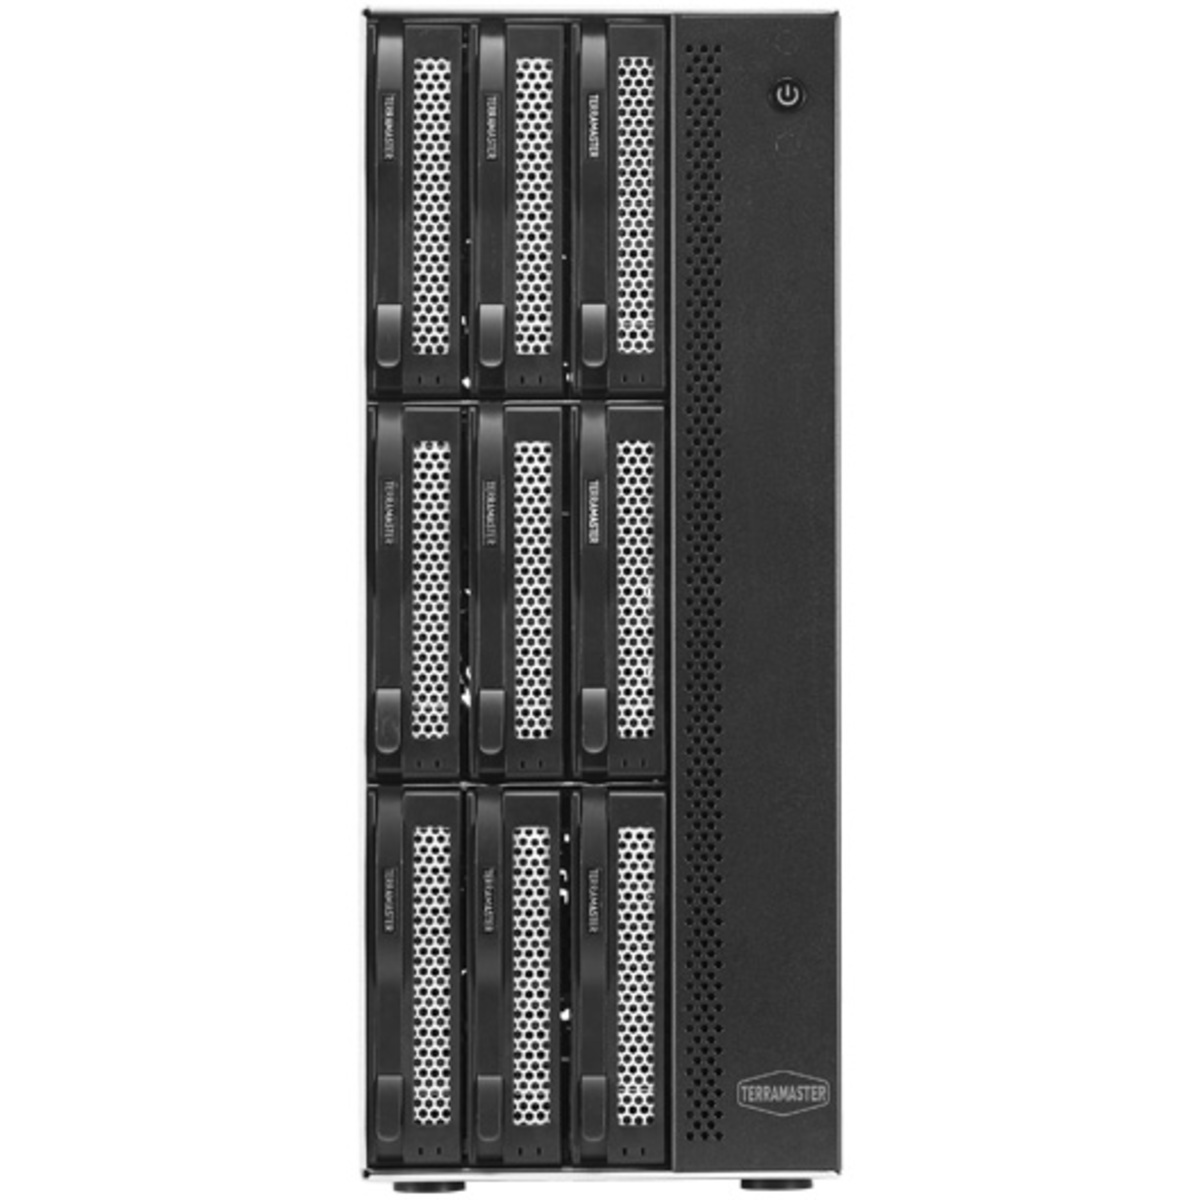 TerraMaster T9-450 180tb 9-Bay Desktop Multimedia / Power User / Business NAS - Network Attached Storage Device 9x20tb Toshiba Enterprise Capacity MG10ACA20TE 3.5 7200rpm SATA 6Gb/s HDD ENTERPRISE Class Drives Installed - Burn-In Tested T9-450